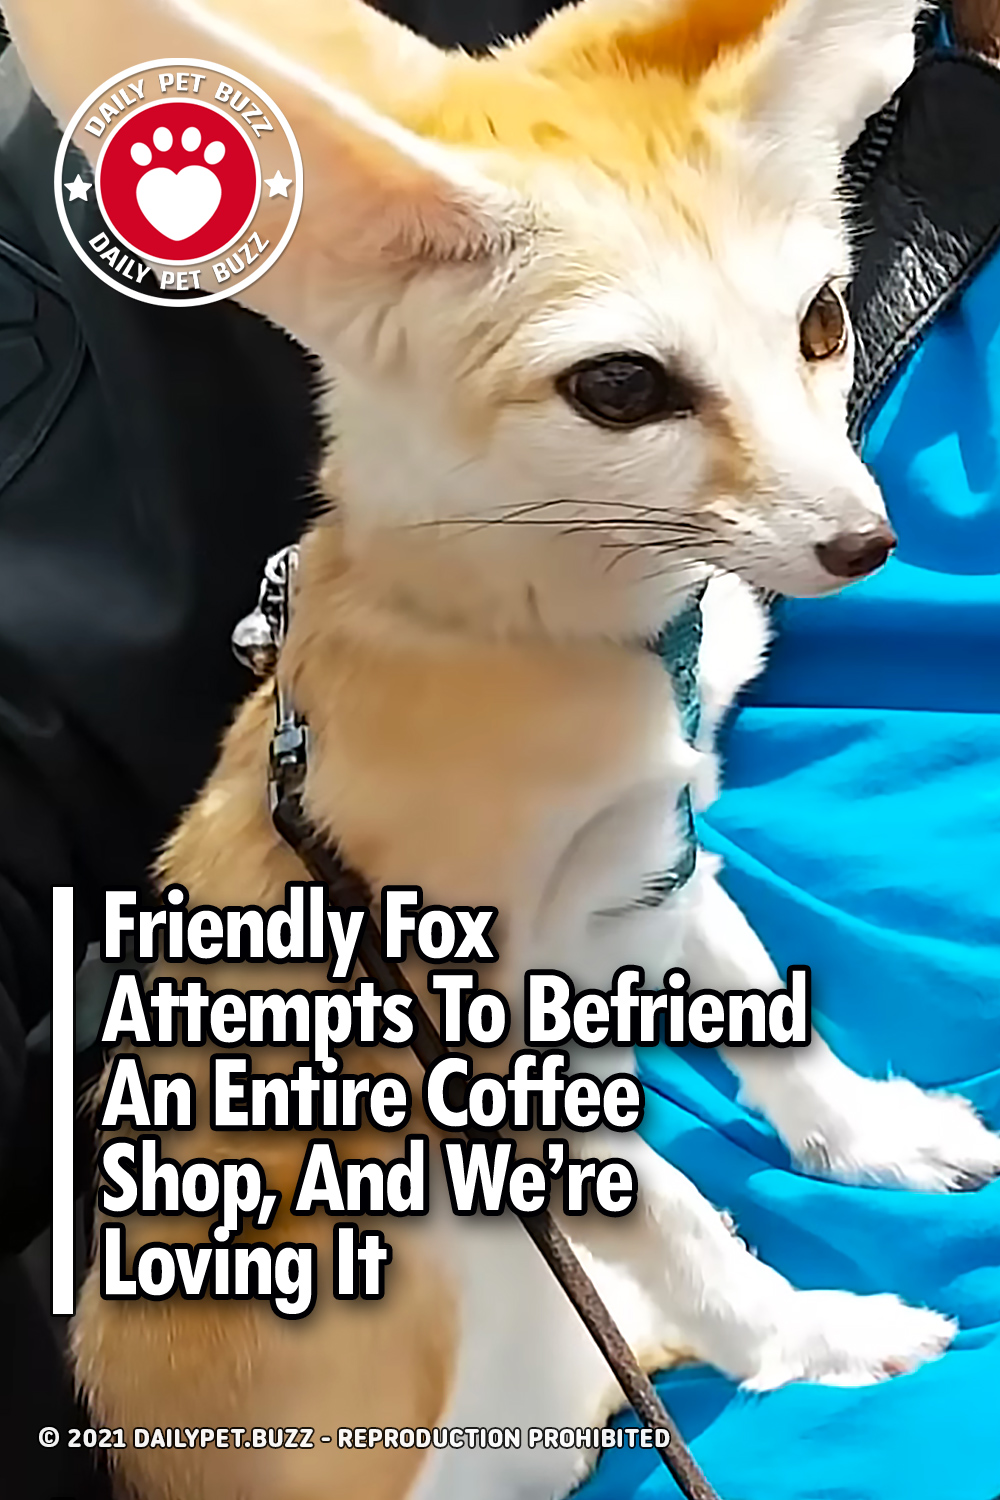 Friendly Fox Attempts To Befriend An Entire Coffee Shop, And We’re Loving It